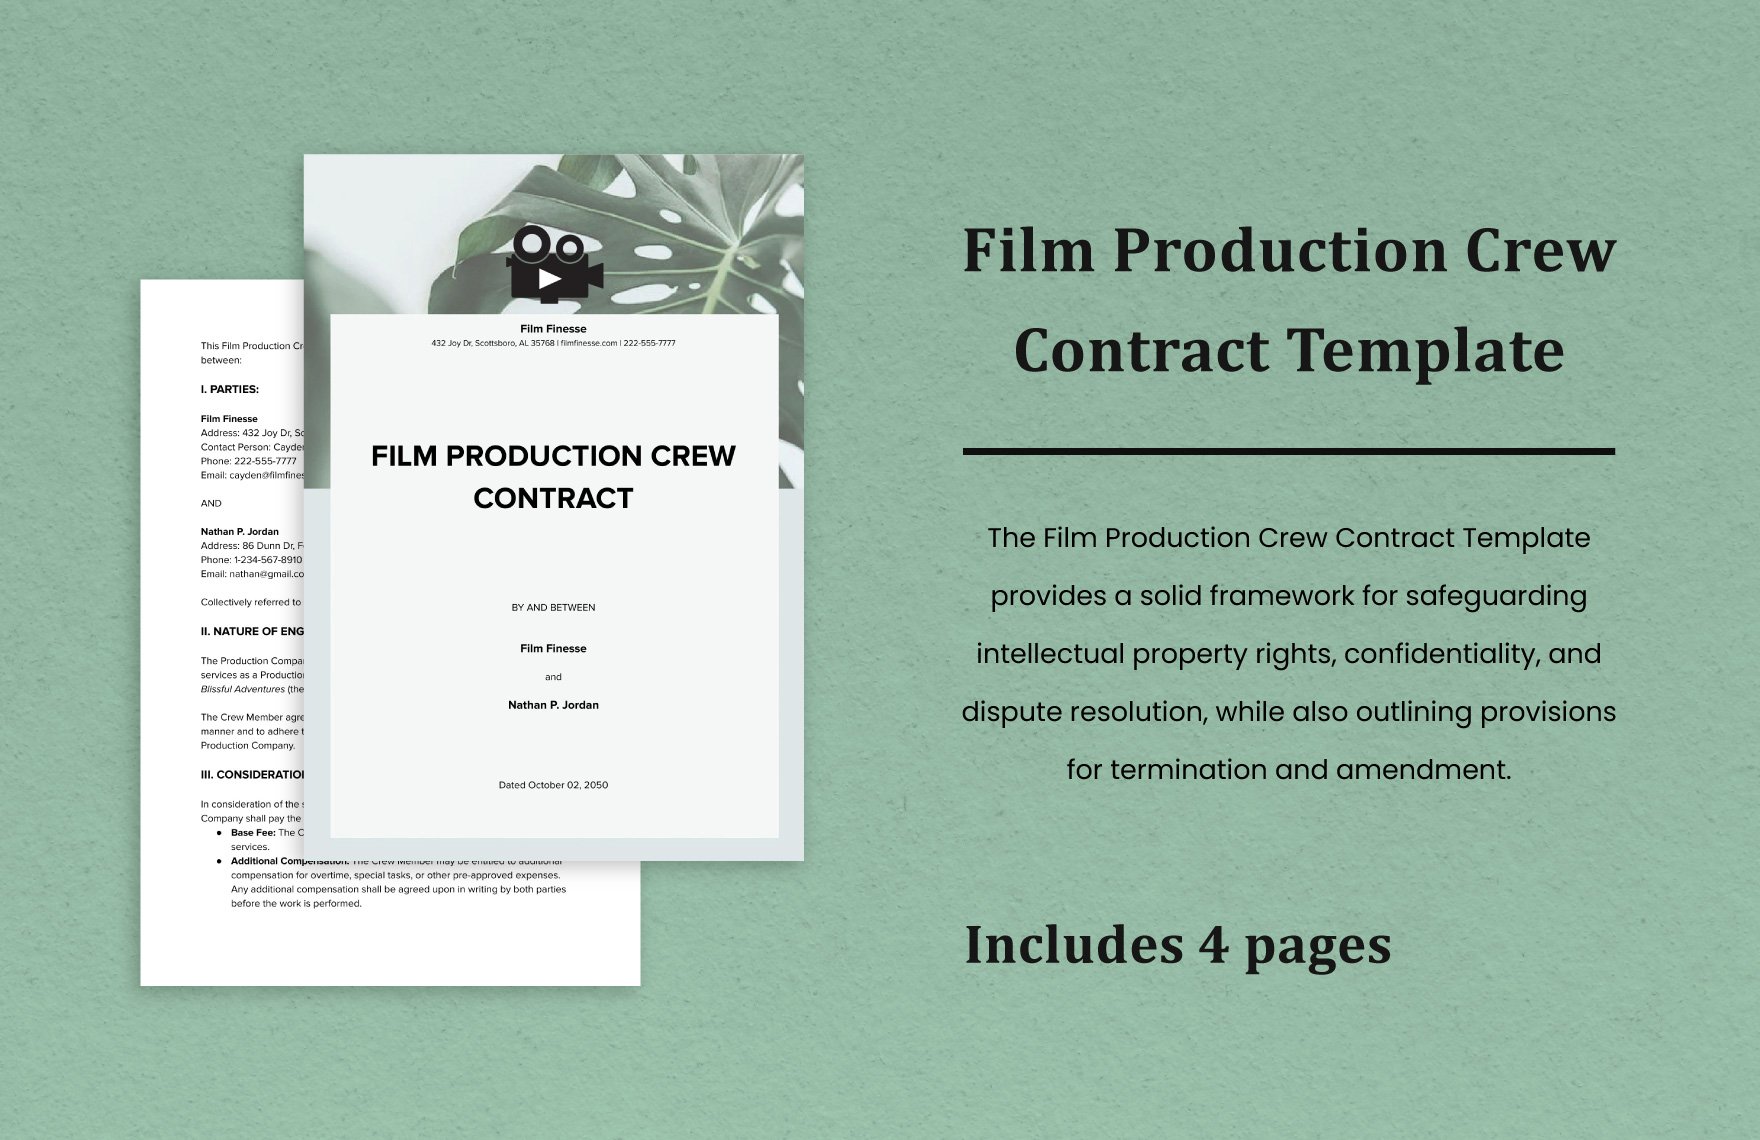 Film Production Crew Contract Template